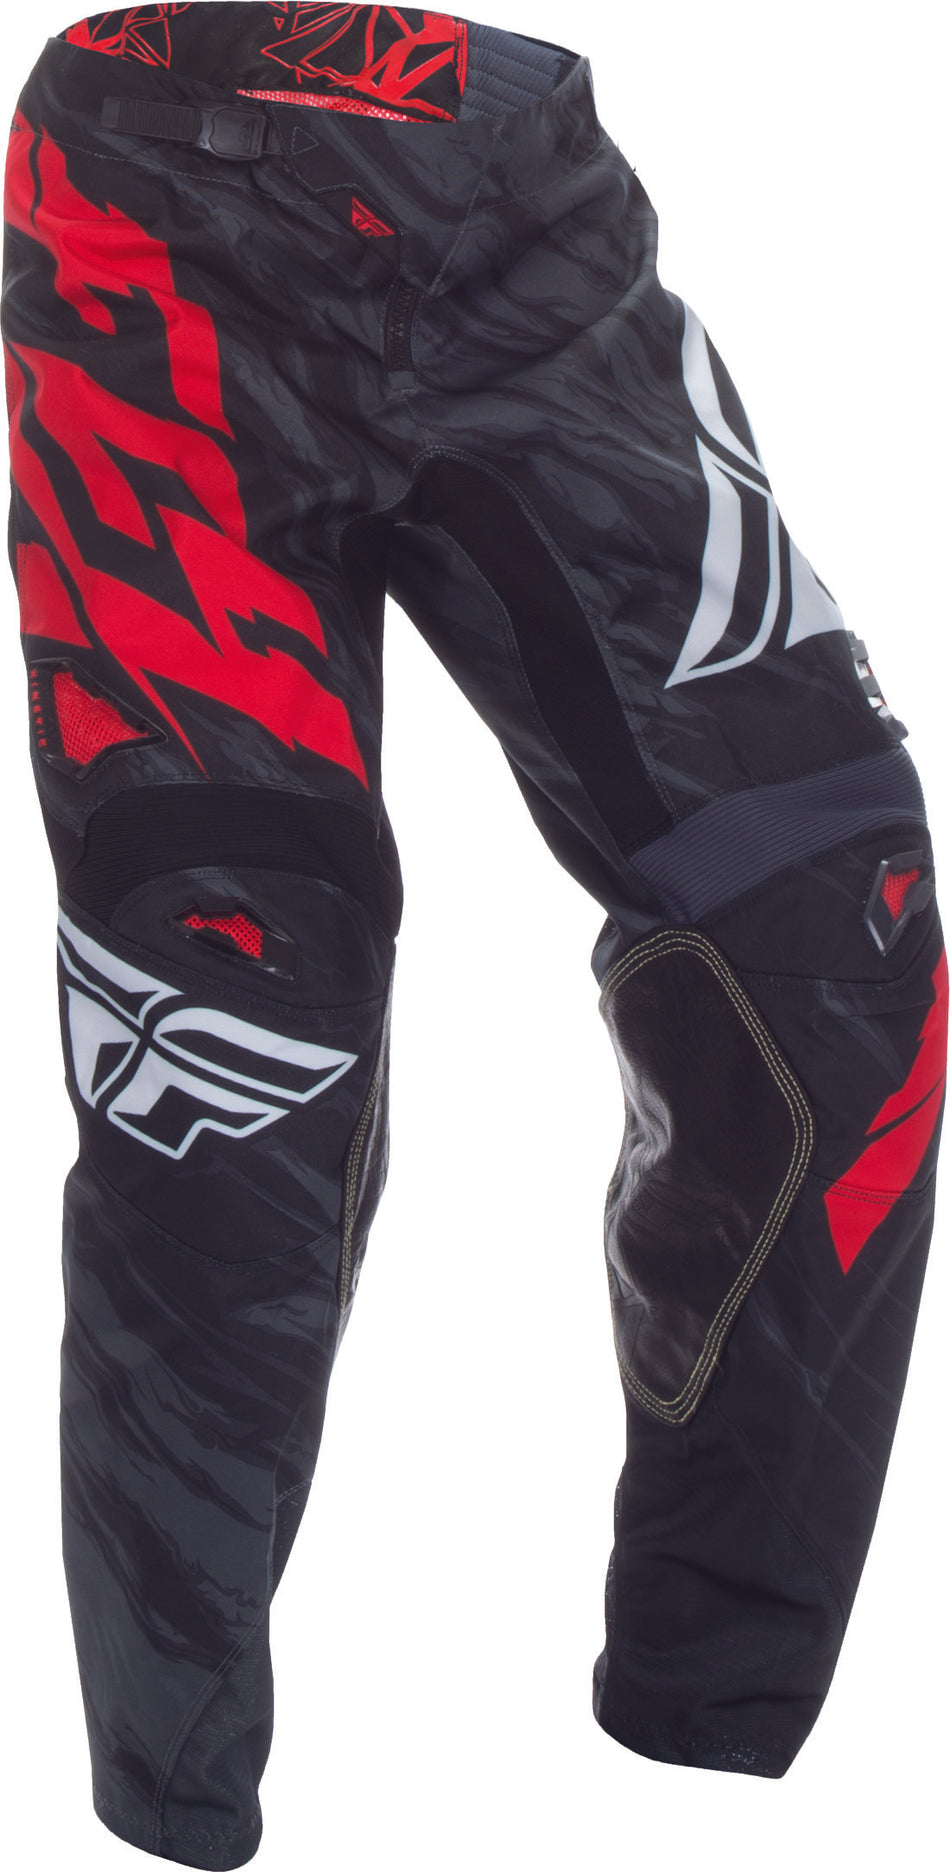 FLY RACING Kinetic Relapse Pant Black/Red Sz 26 370-43026